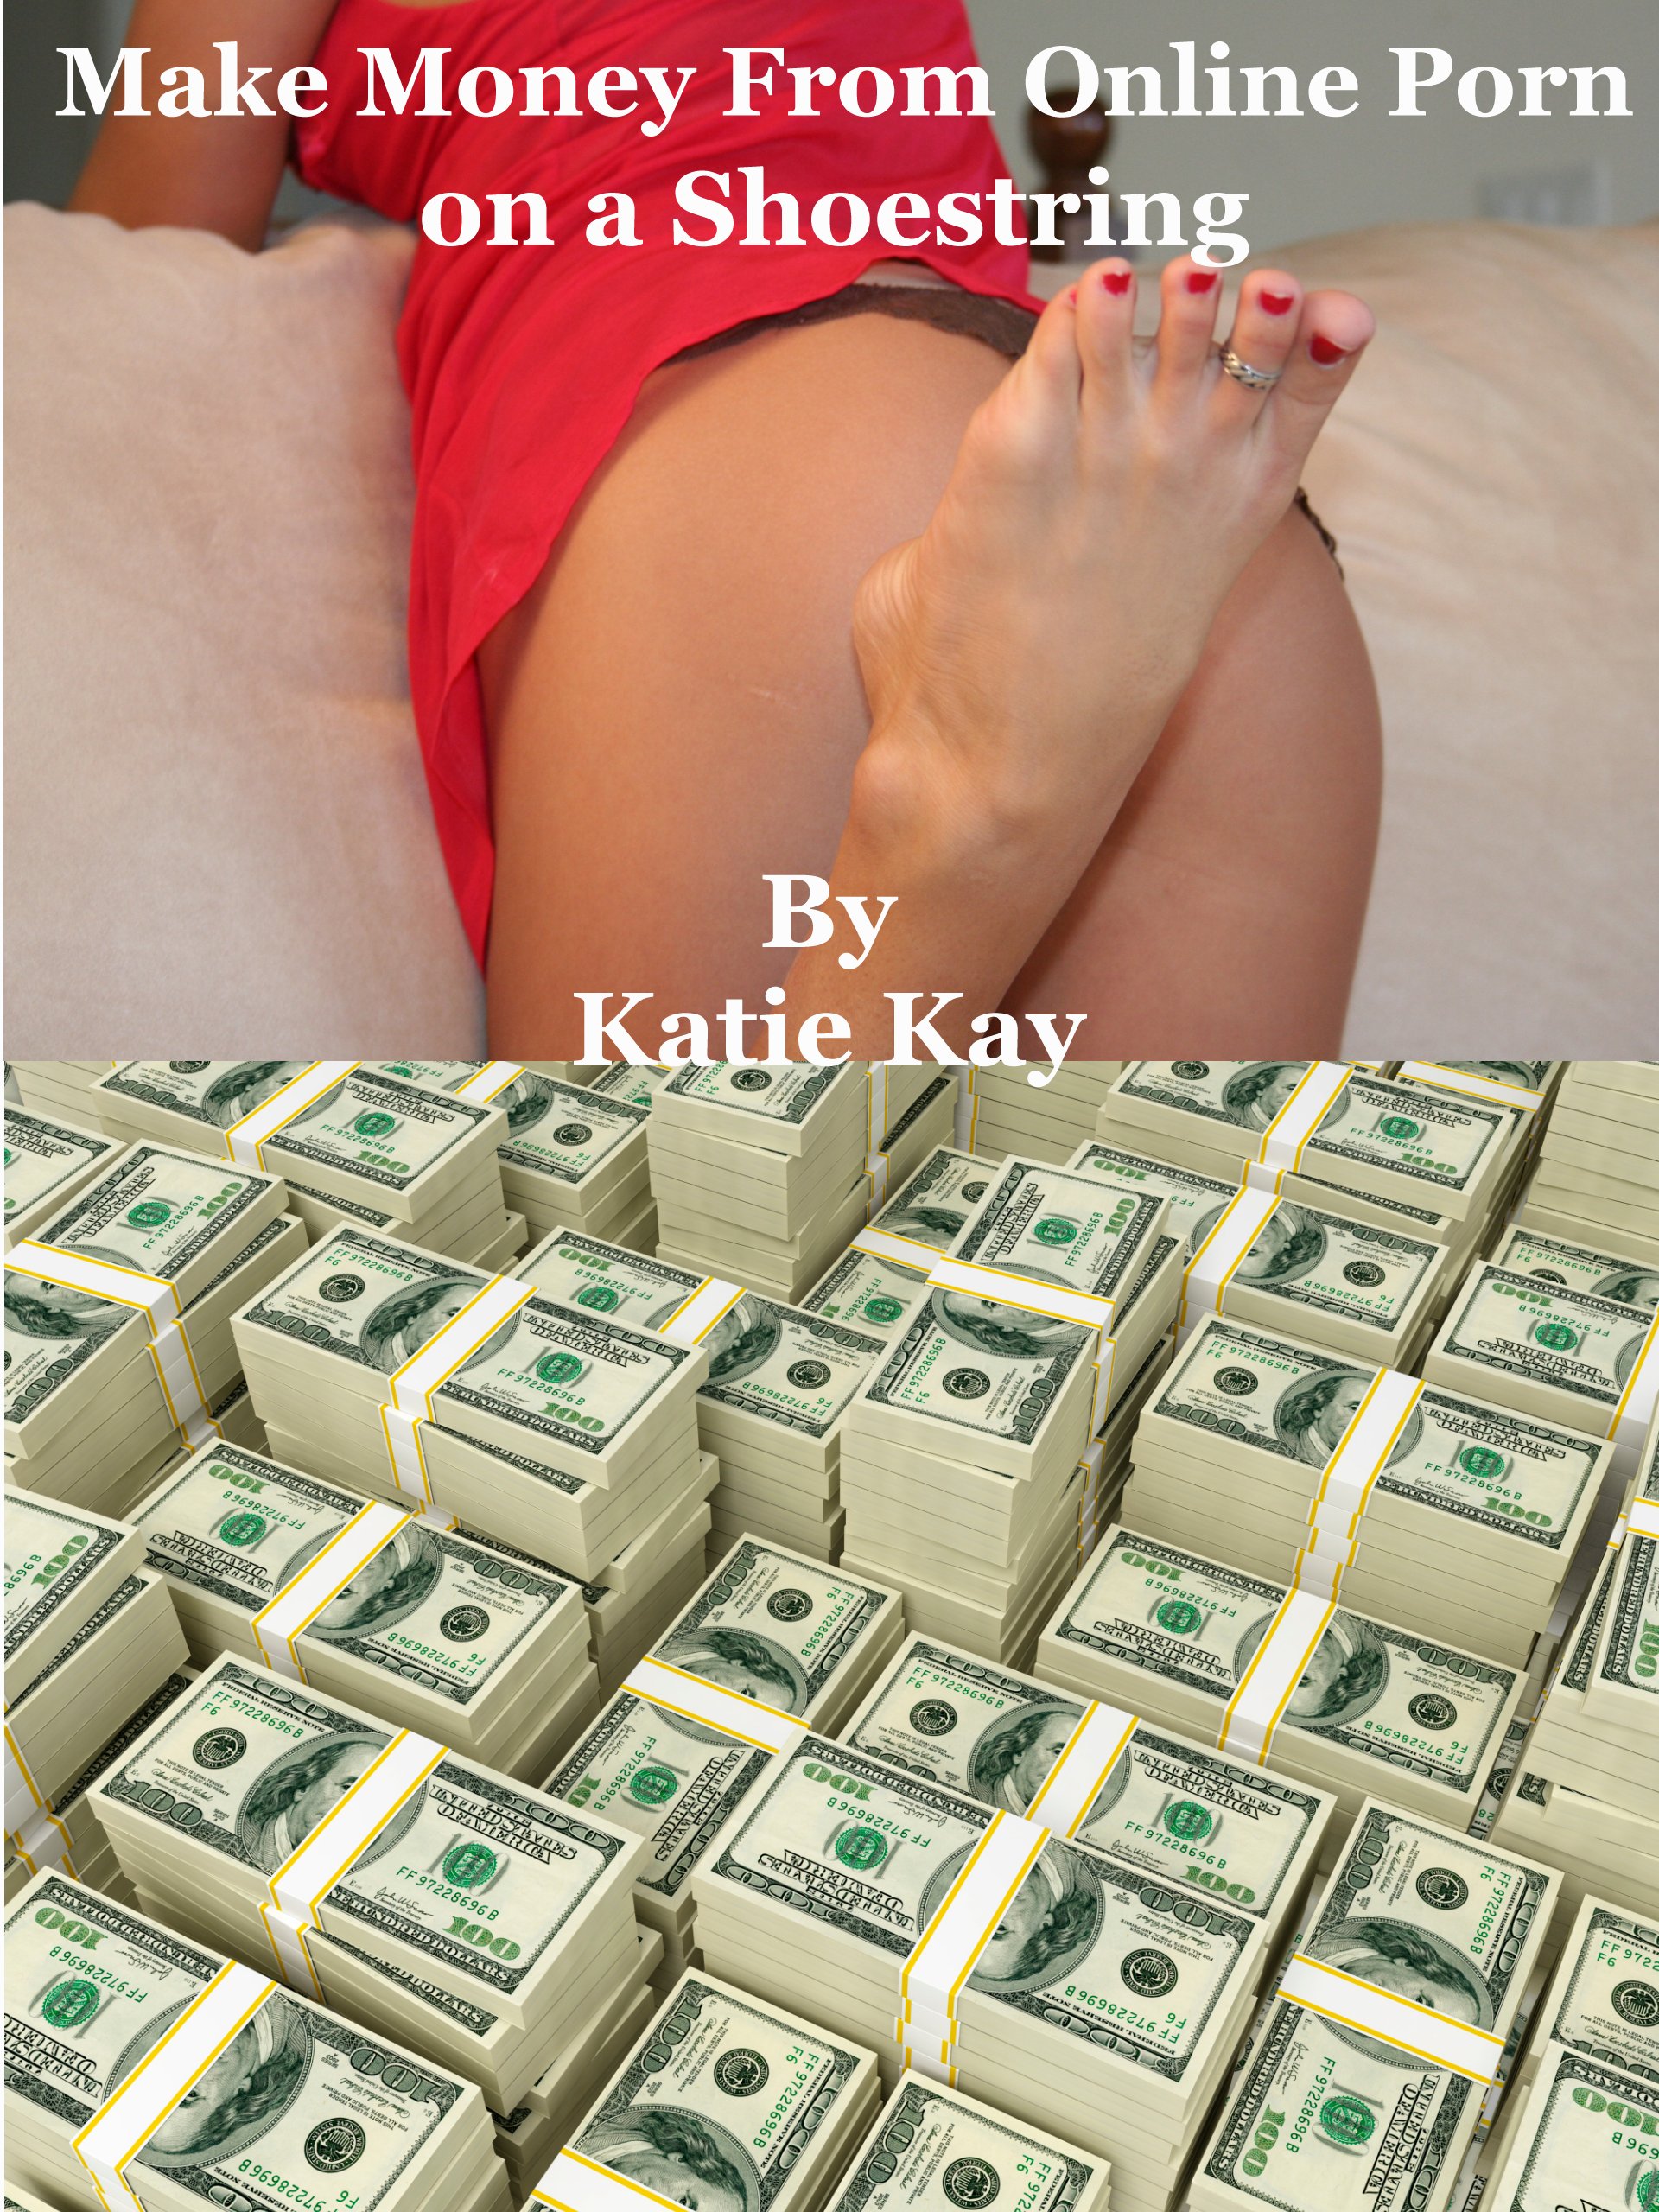 Make Money - Smashwords â€“ Make Money From Online Porn on a Shoestring â€“ a book by Katie  Kay